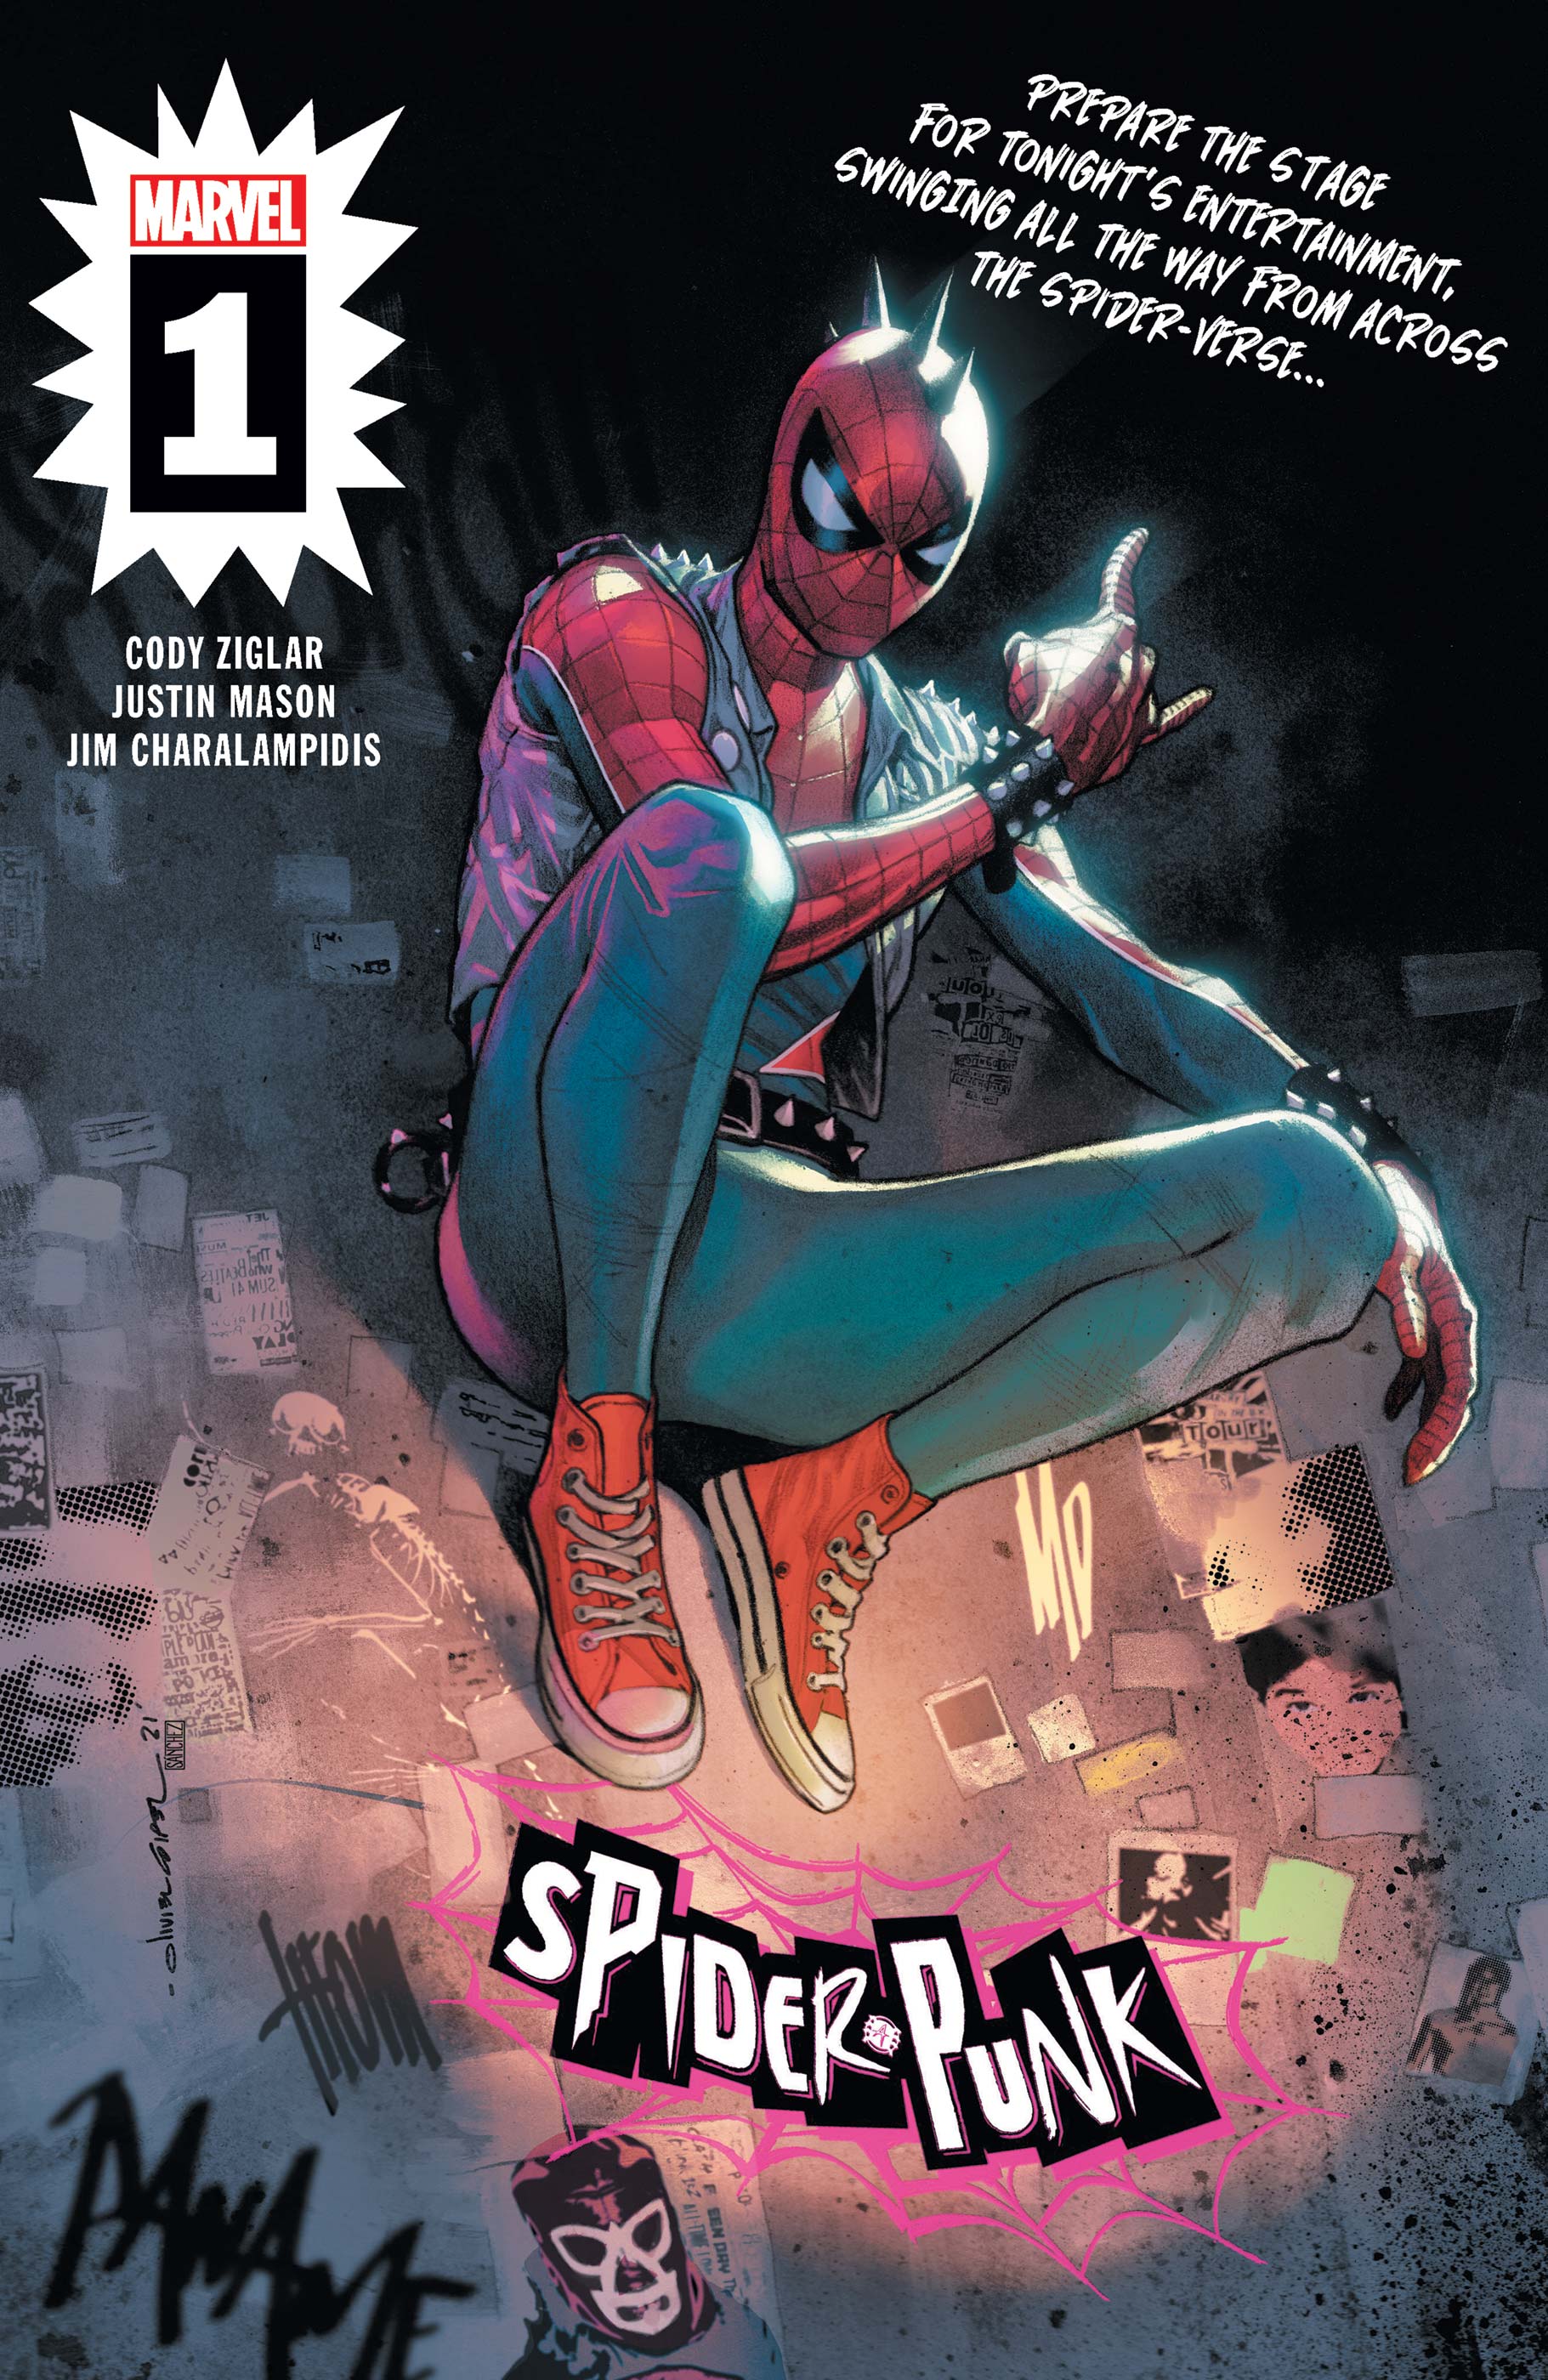 Free Fast Delivery Mason 759606202447 A SPIDER-PUNK #1 Marvel Comics ...